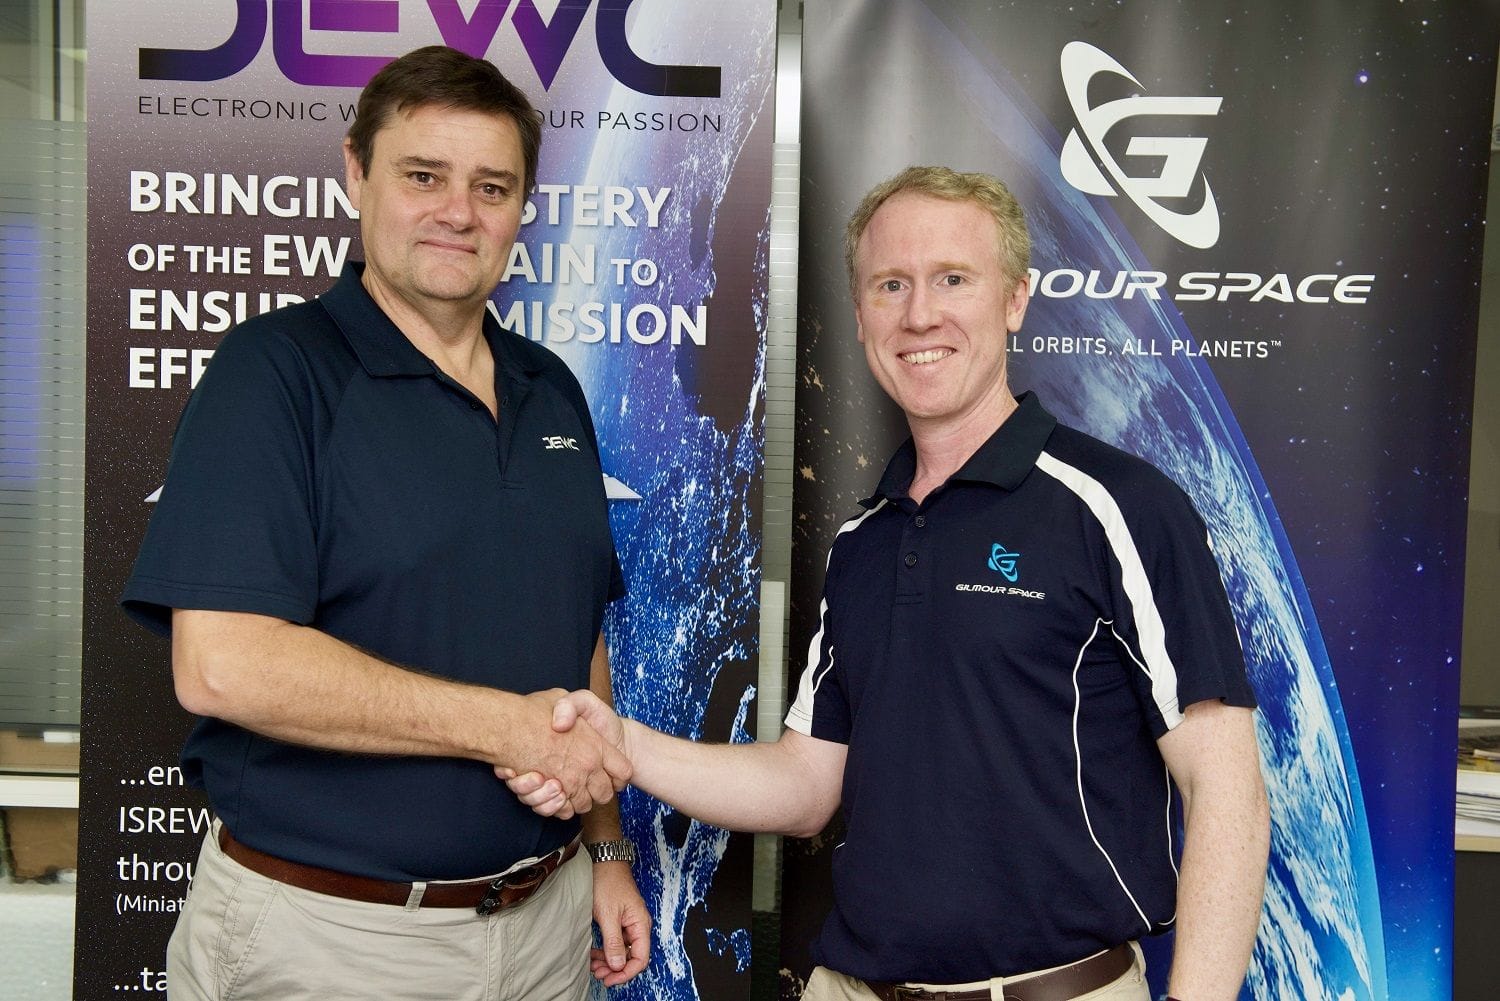 Gilmour Space Technologies partners with electronic warfare systems company